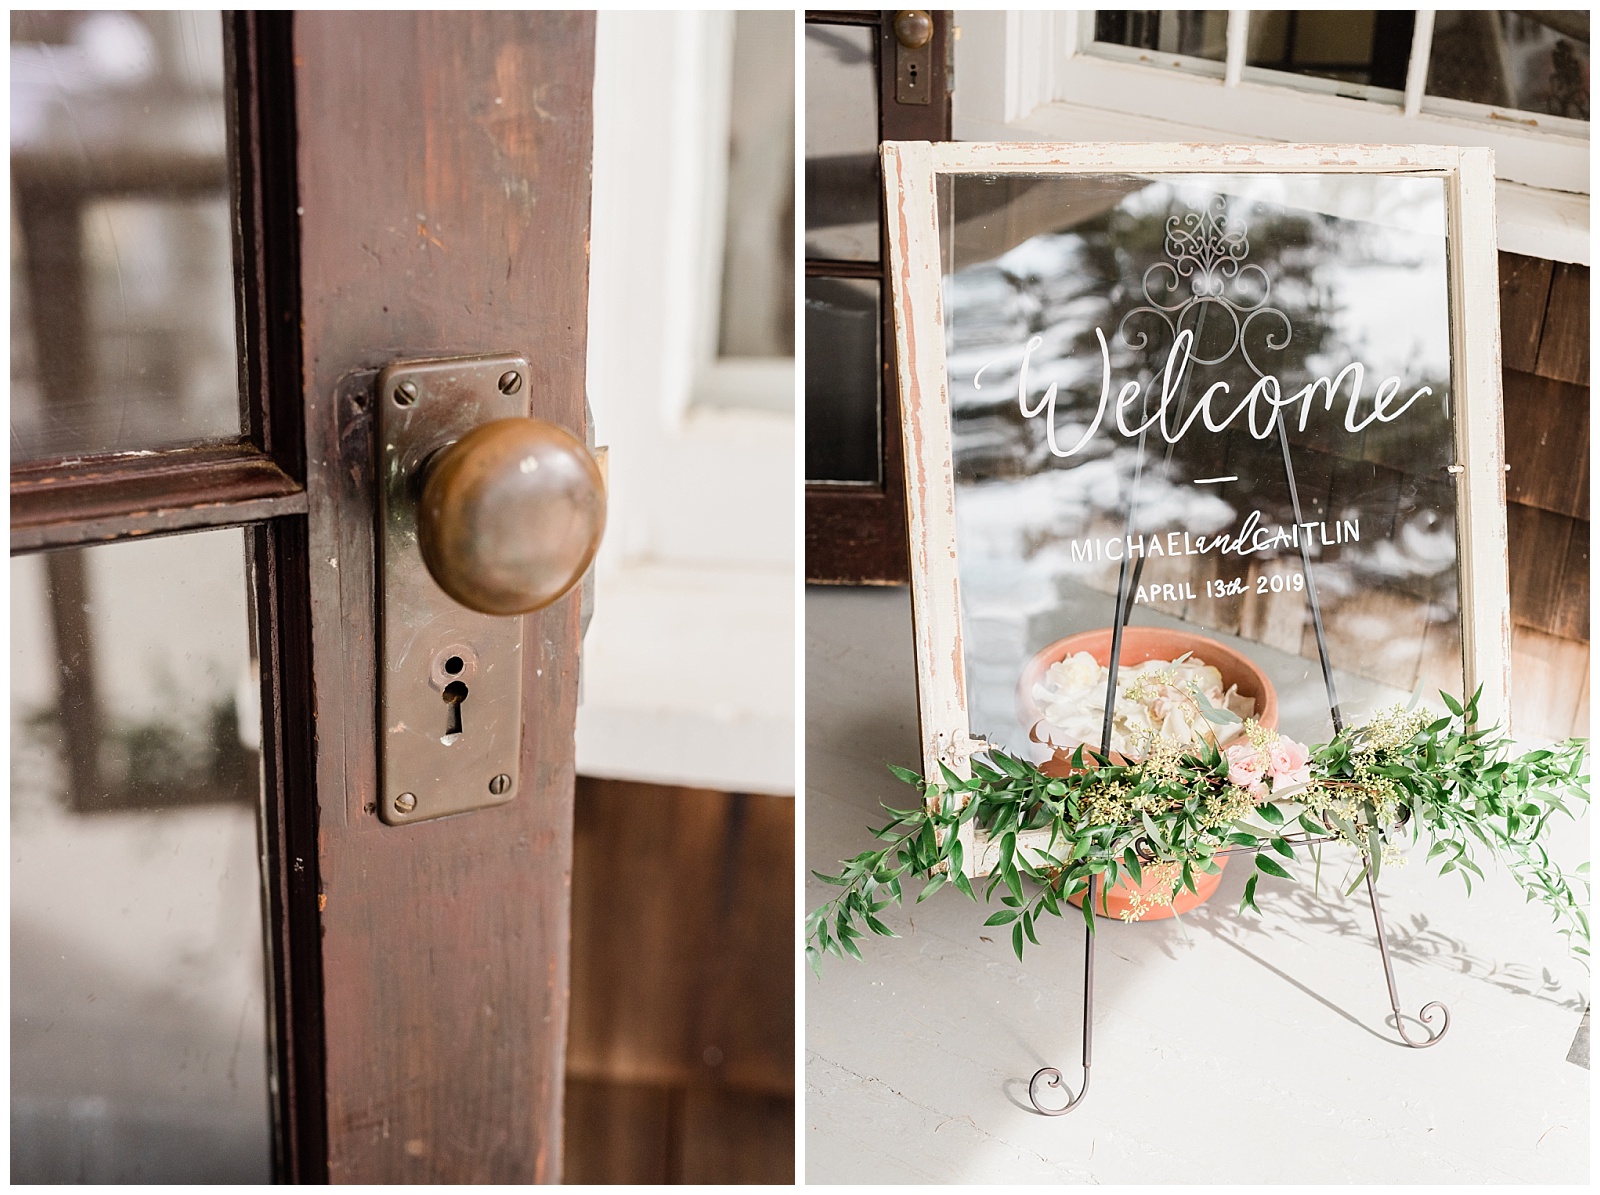 Clear glass welcome sign with calligraphy sits outside the door.